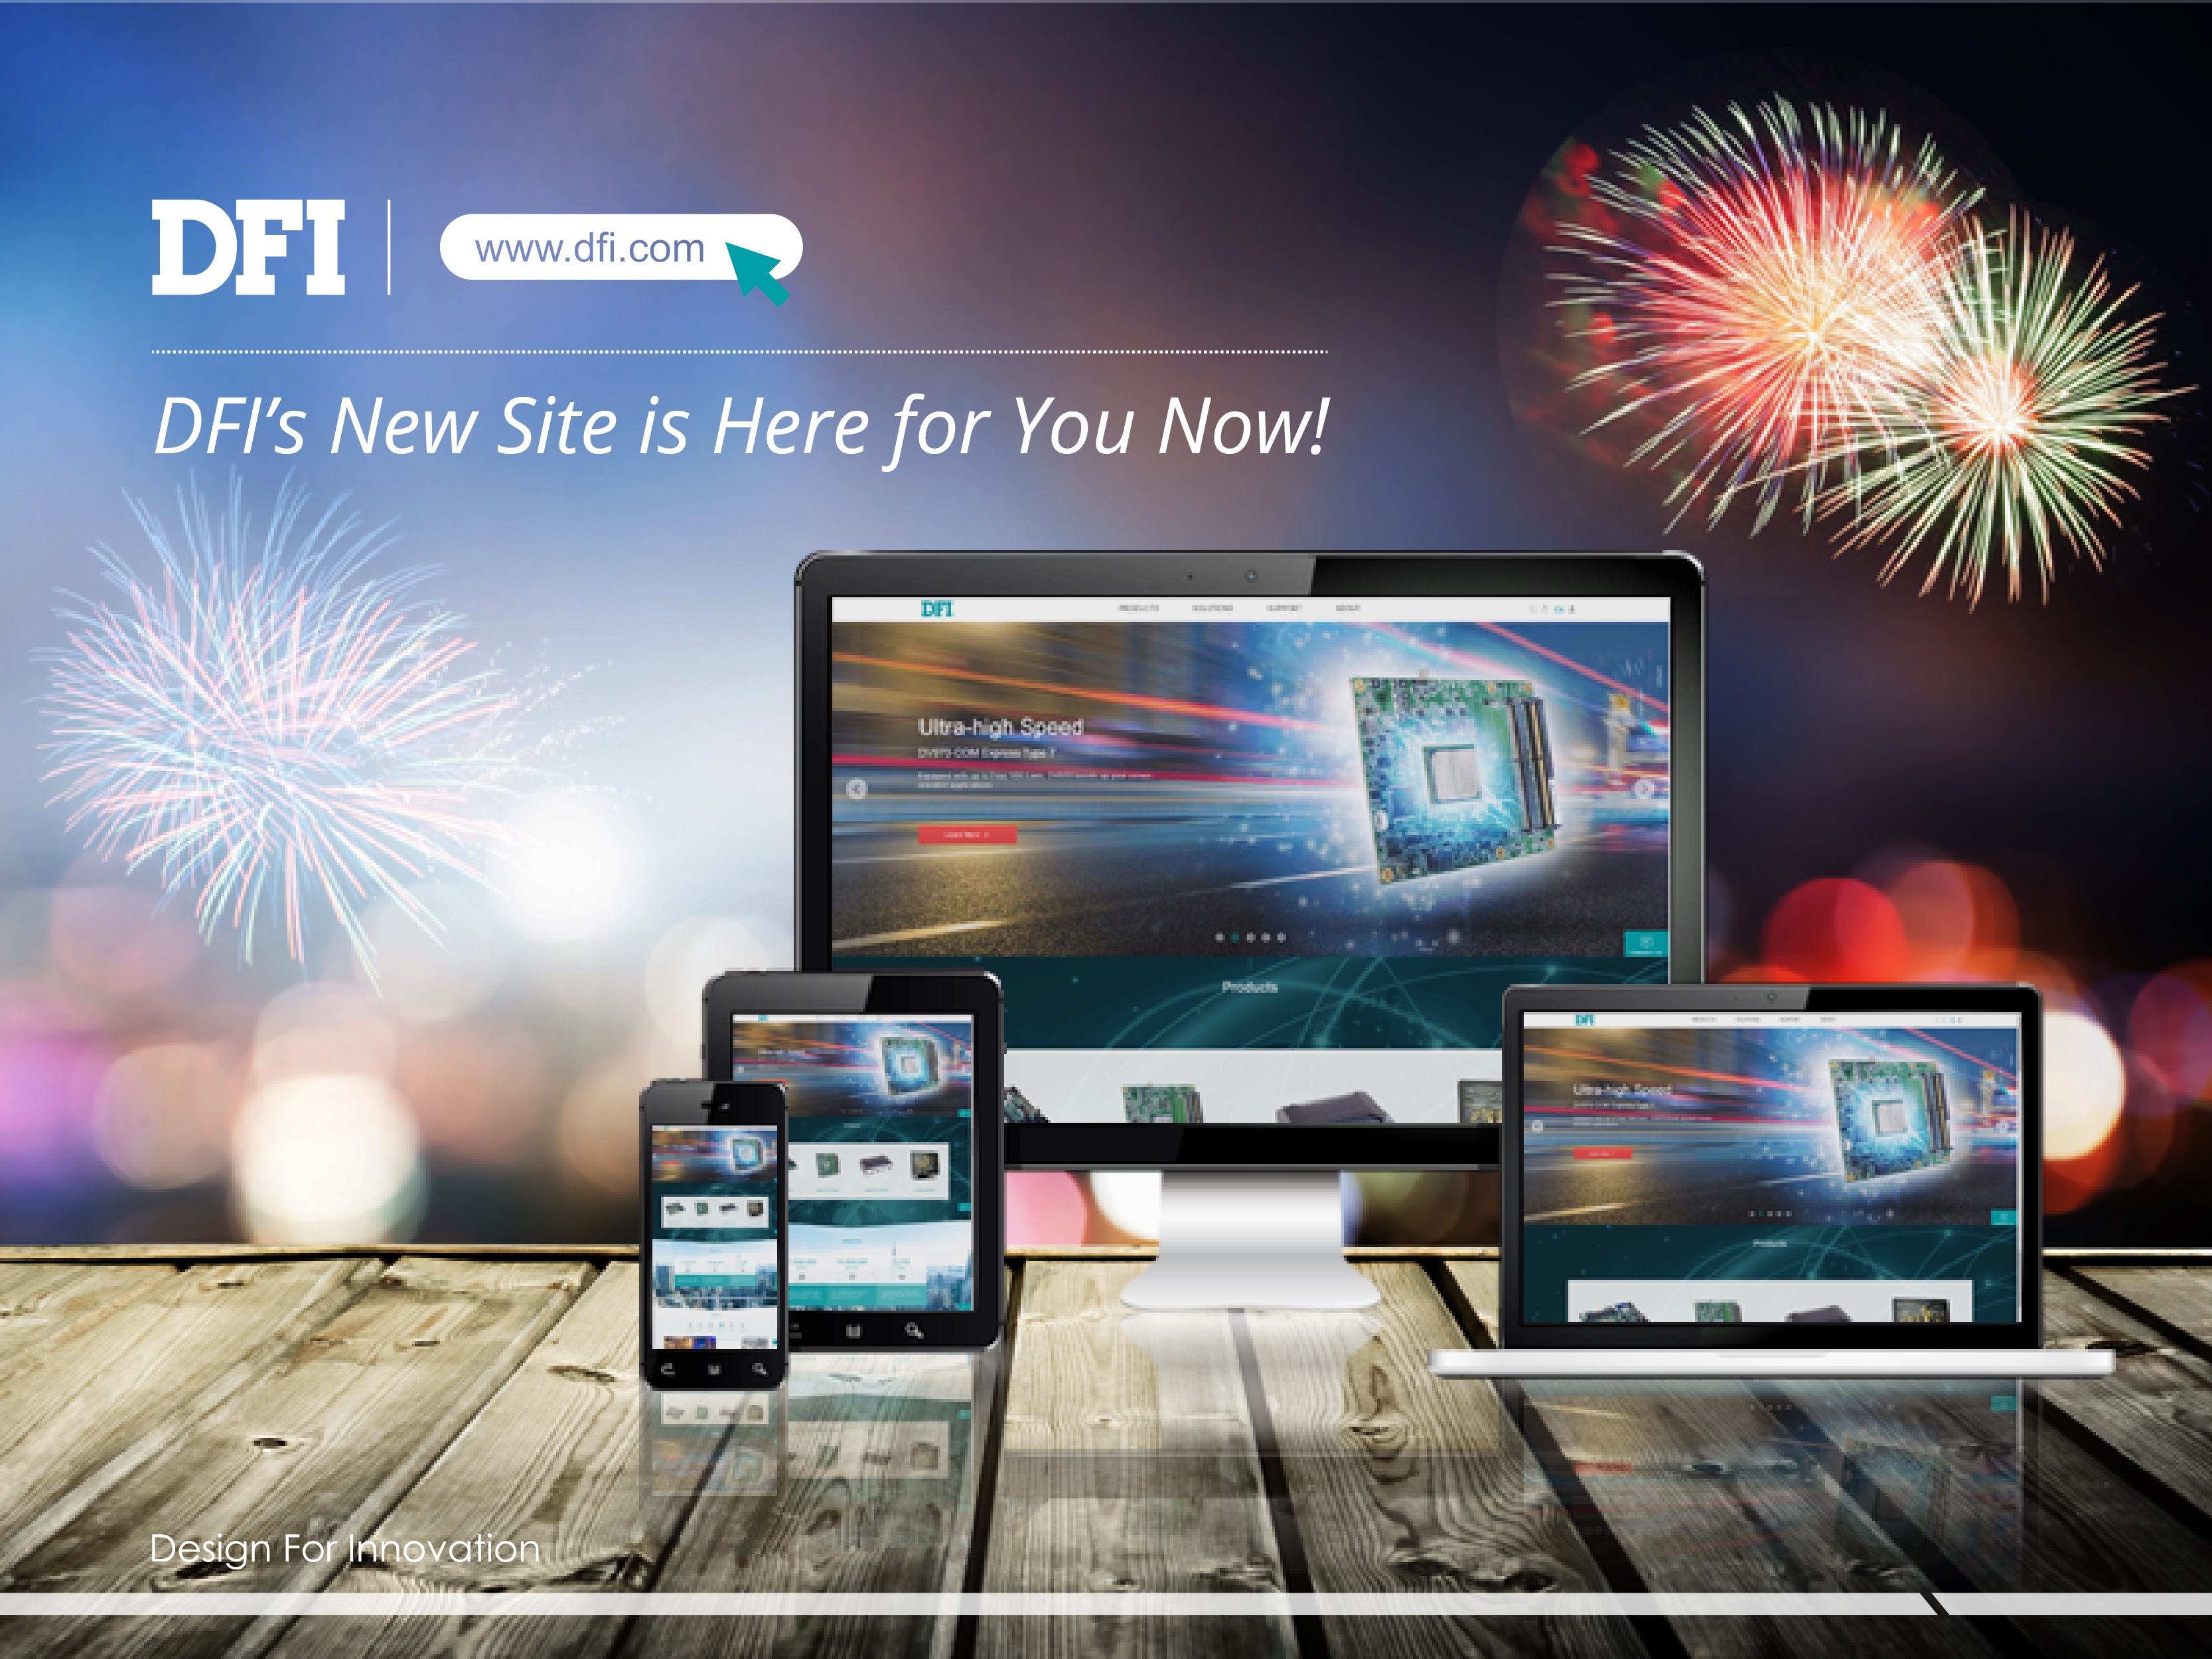 DFI’s New Site is Here for You Now!